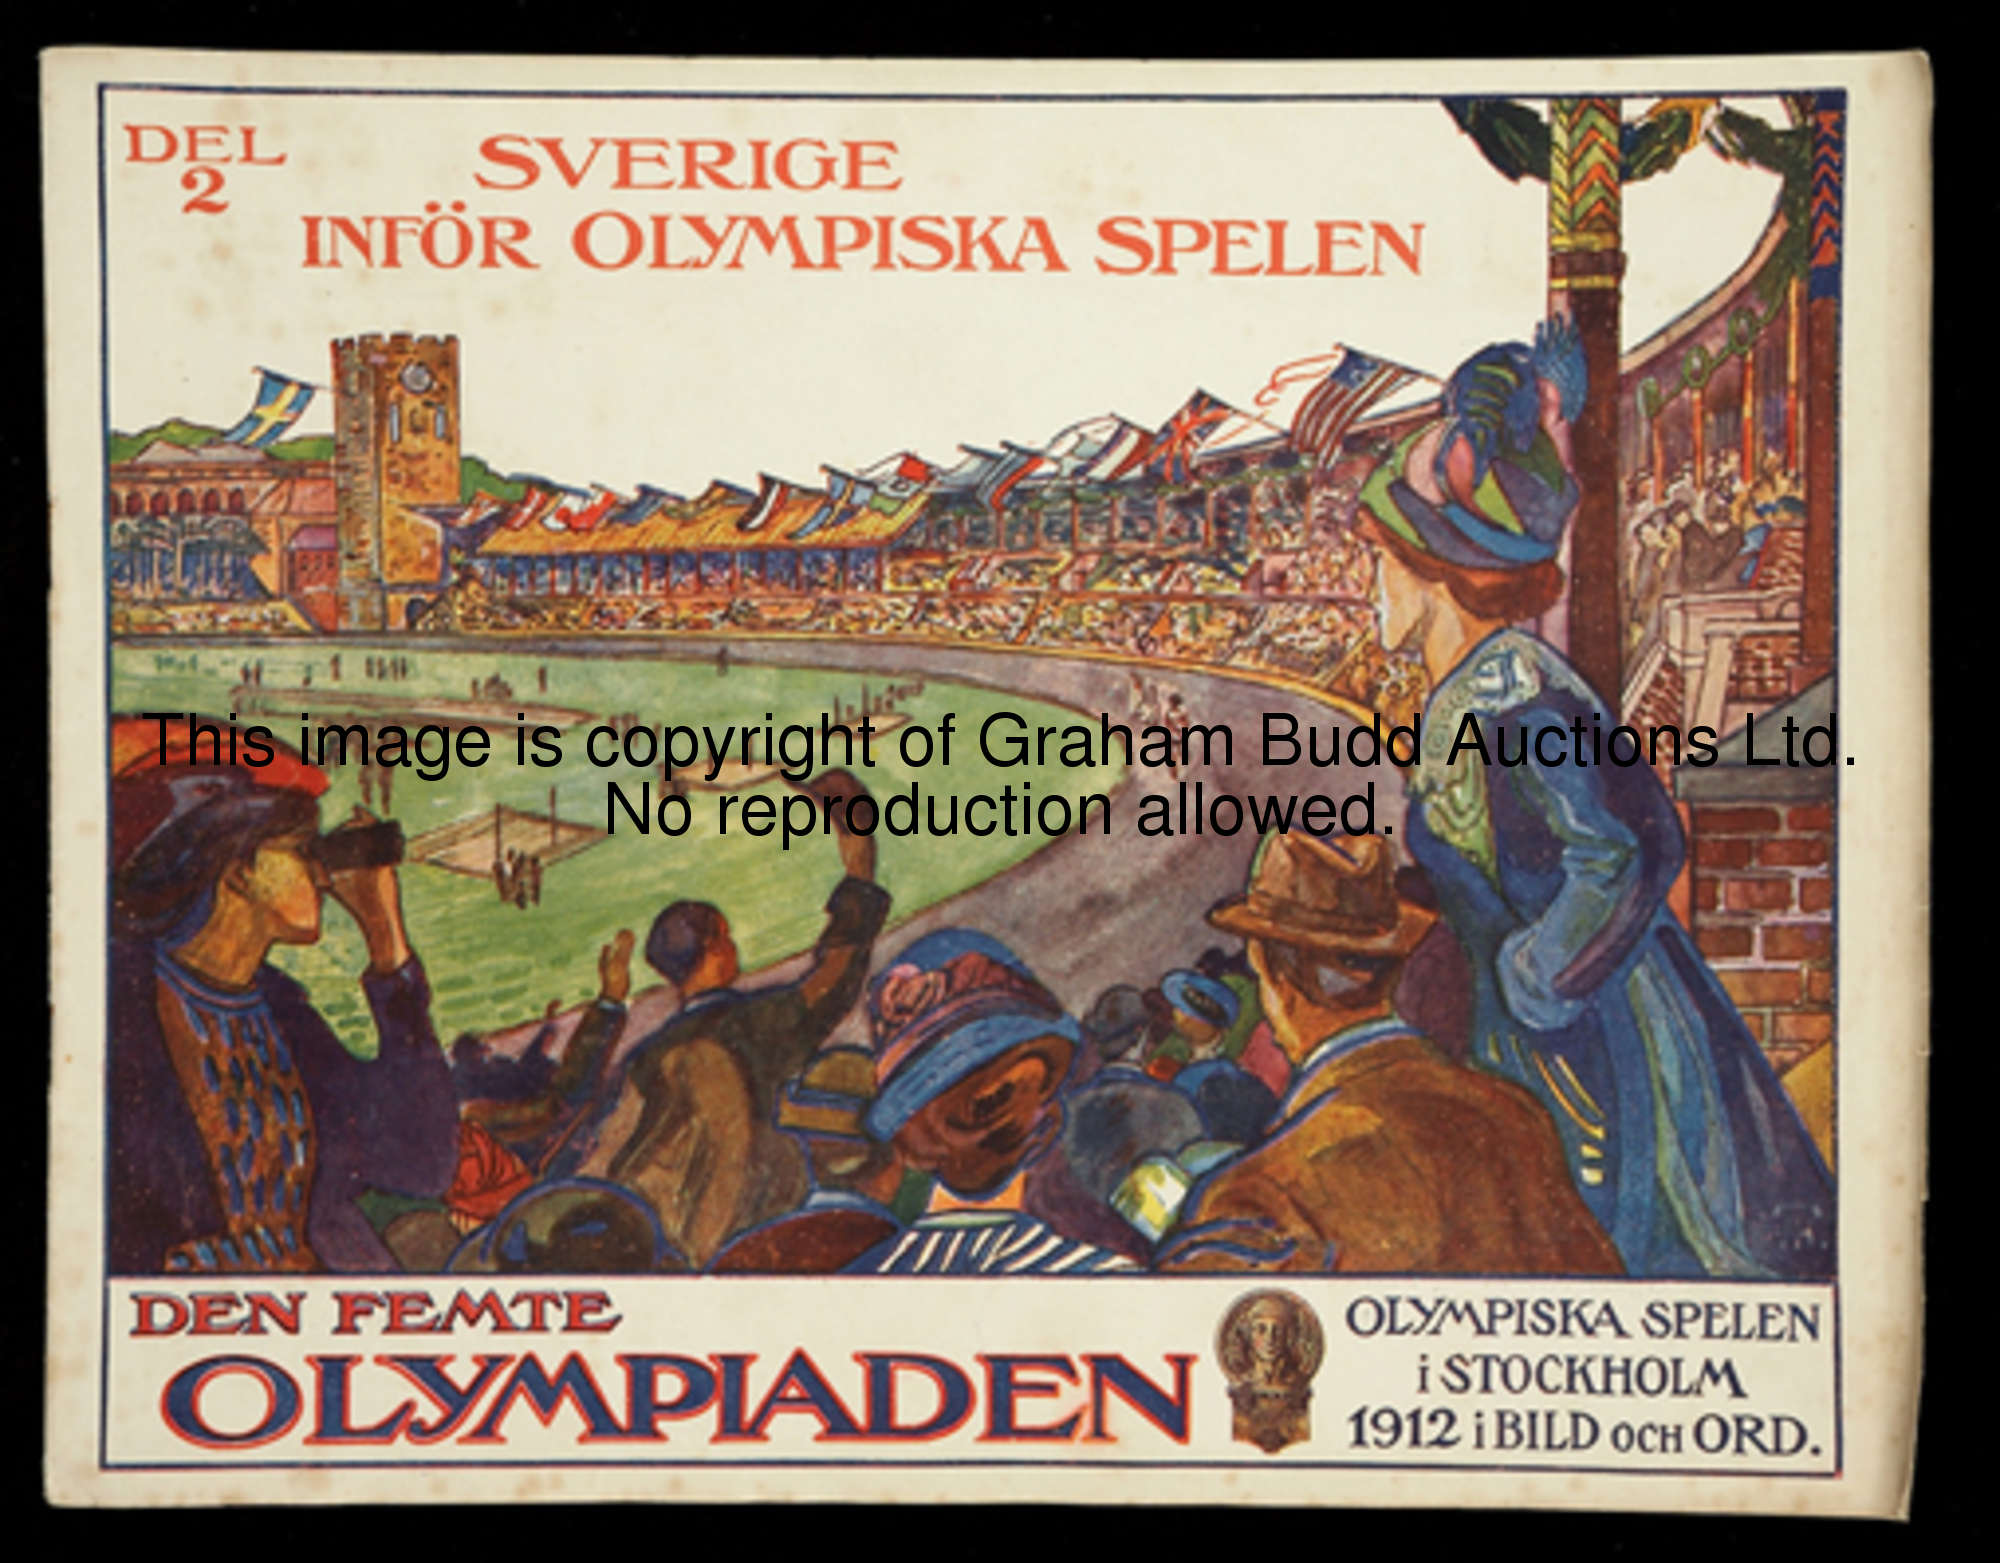 Den Femte Olympiaden, a complete set of 24 parts in 23 booklets for the 1912 Stockholm Olympic Games...